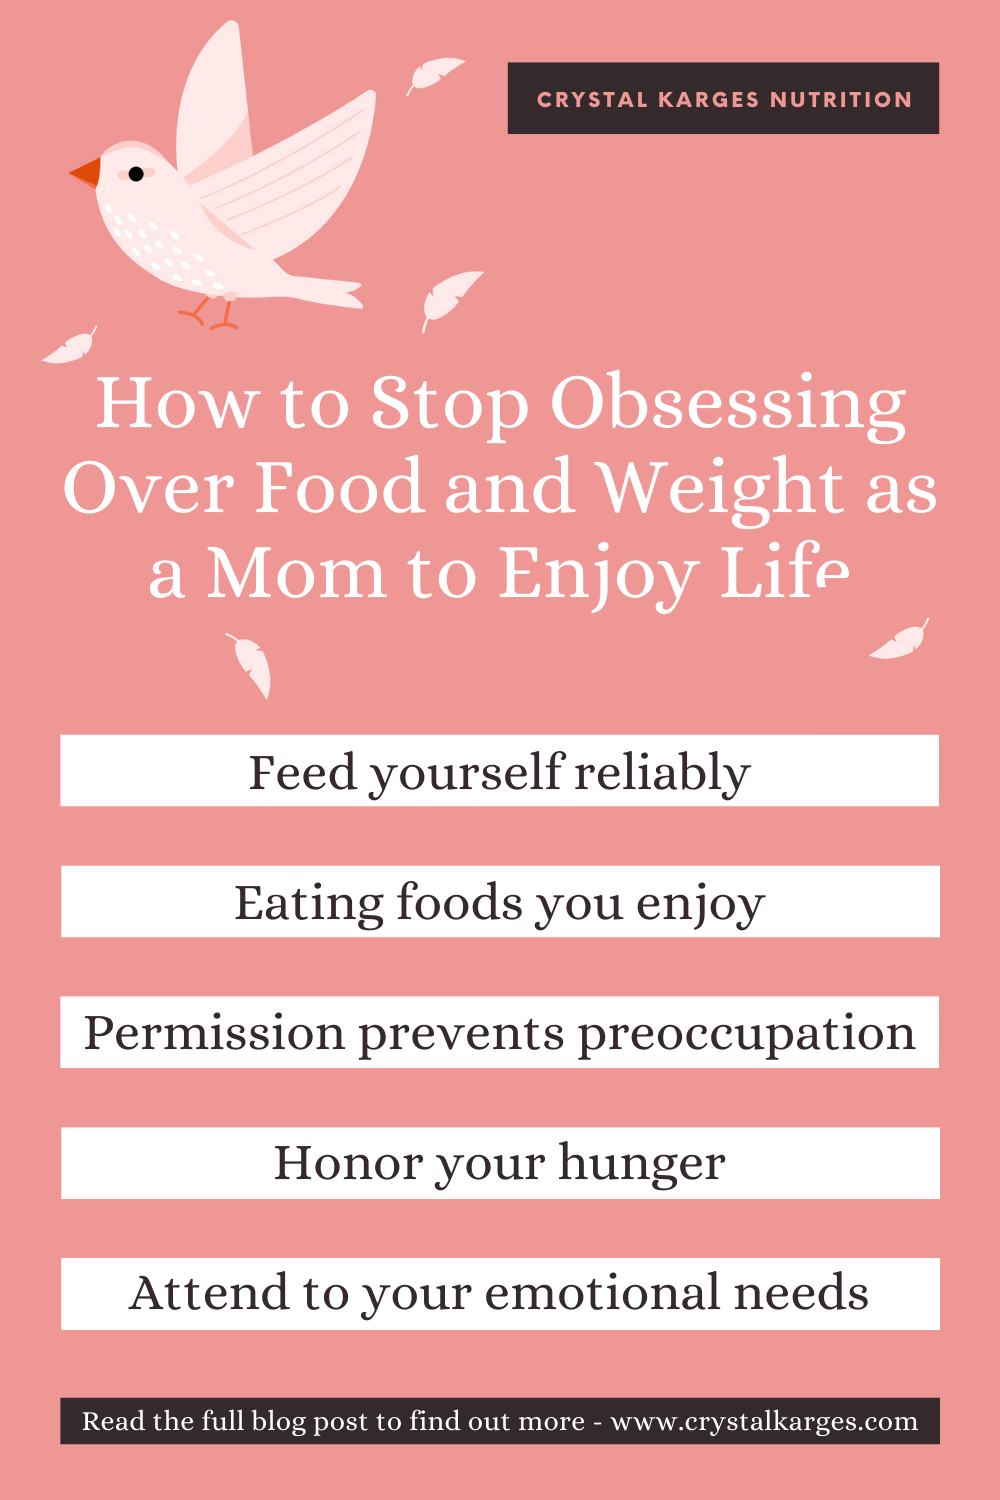 How to Stop Obsessing Over Food and Weight as a Mom to Enjoy Life 2.png